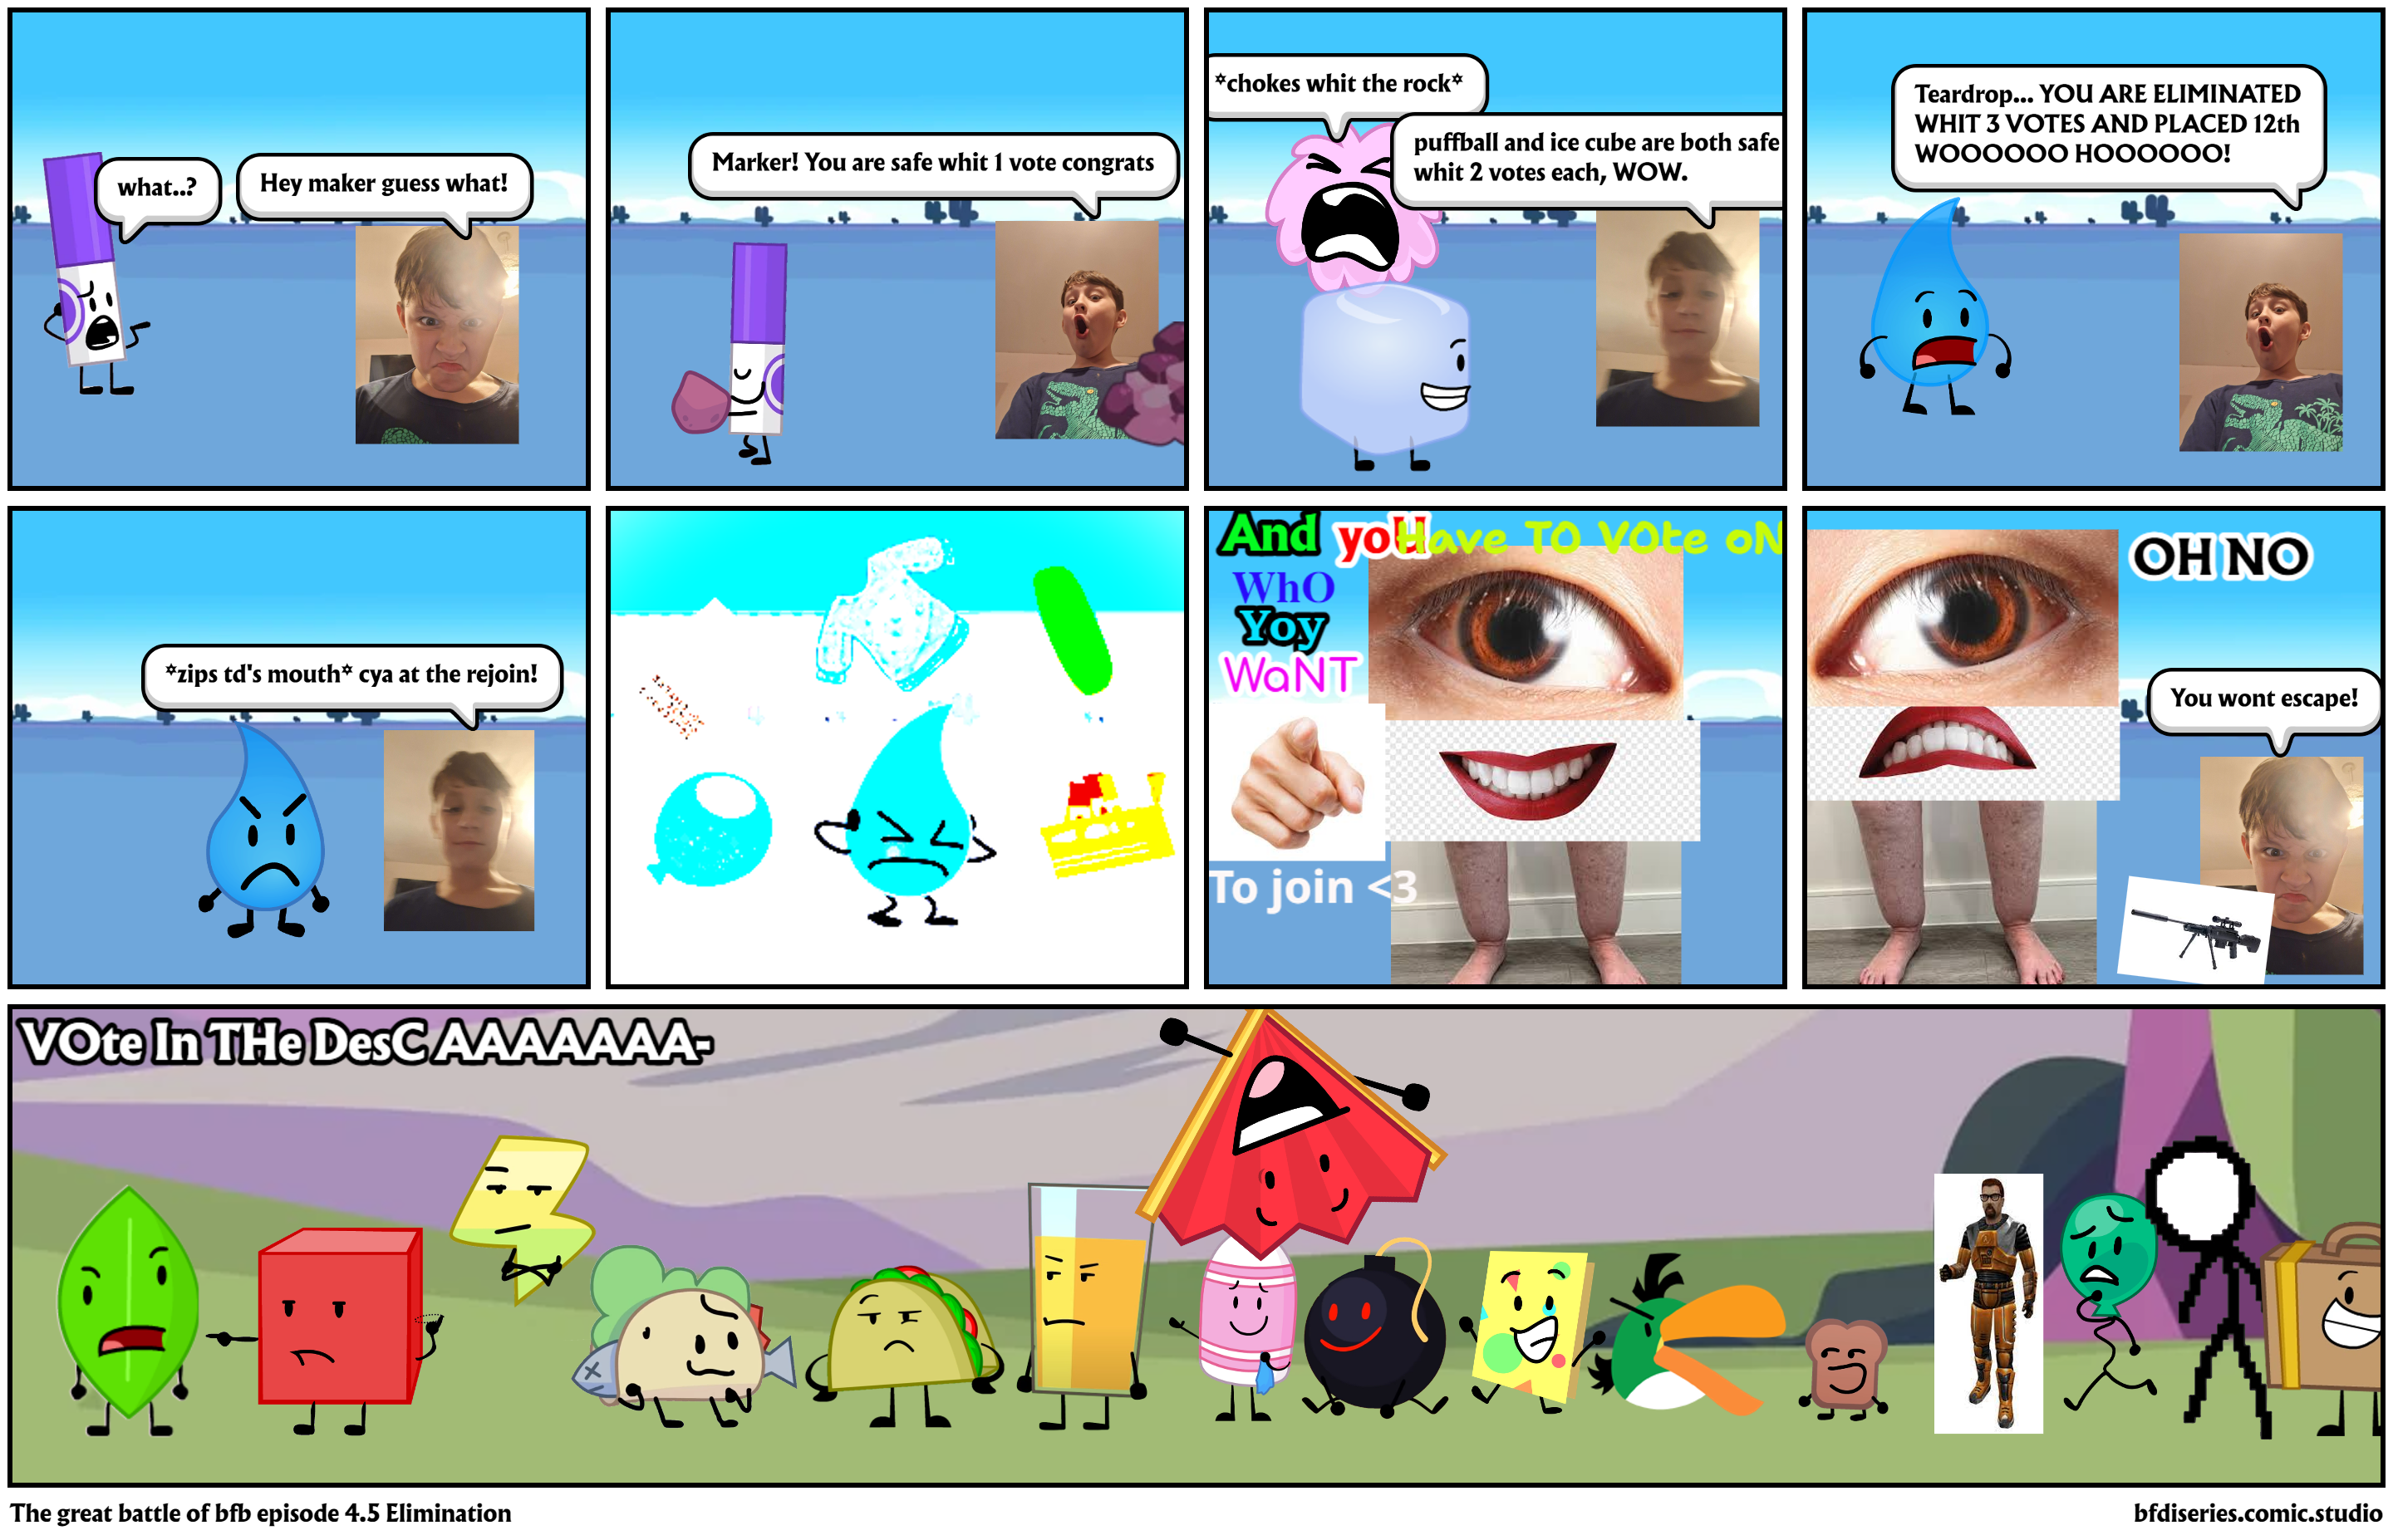 The great battle of bfb episode 4.5 Elimination